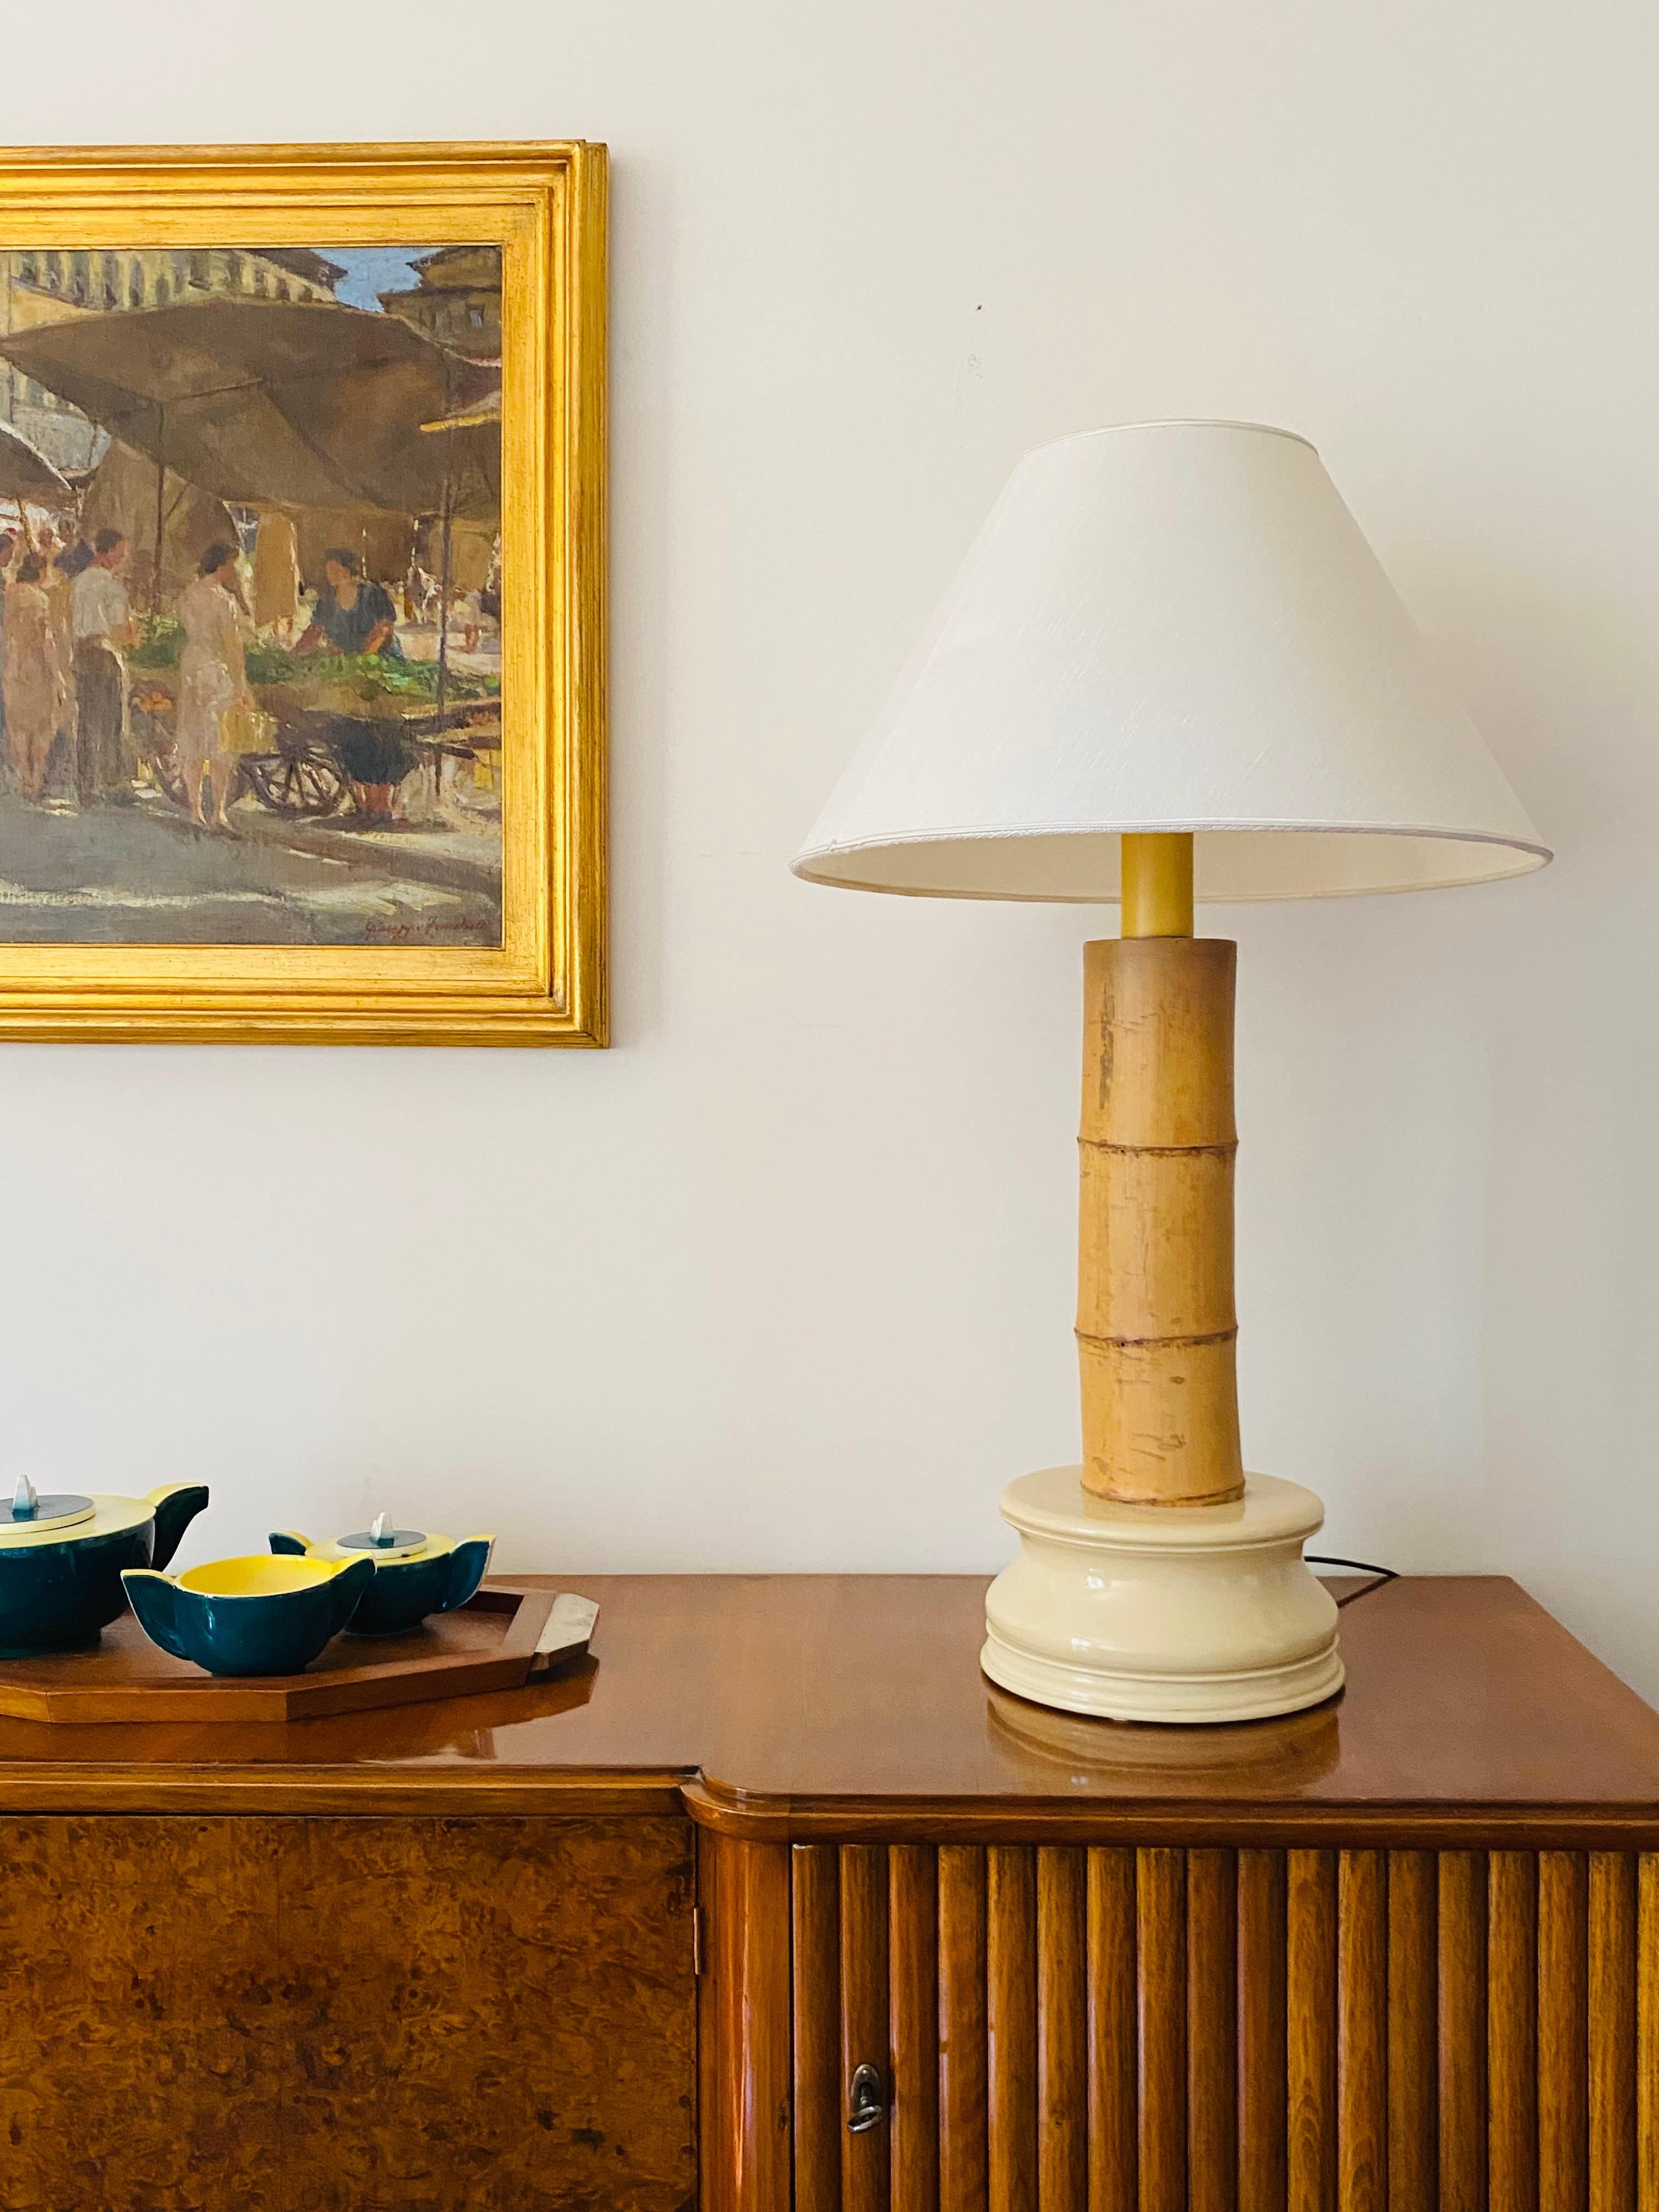 Great Hollywood regency bamboo table lamp

RCM 1867 Ravarini Castoldi, Italy, 1970s

Bamboo, lacquered wood base, fabric lampshade

Label under the base

86 cm H x 50 cm with lampshade

Conditions: very good consistent with age and use.